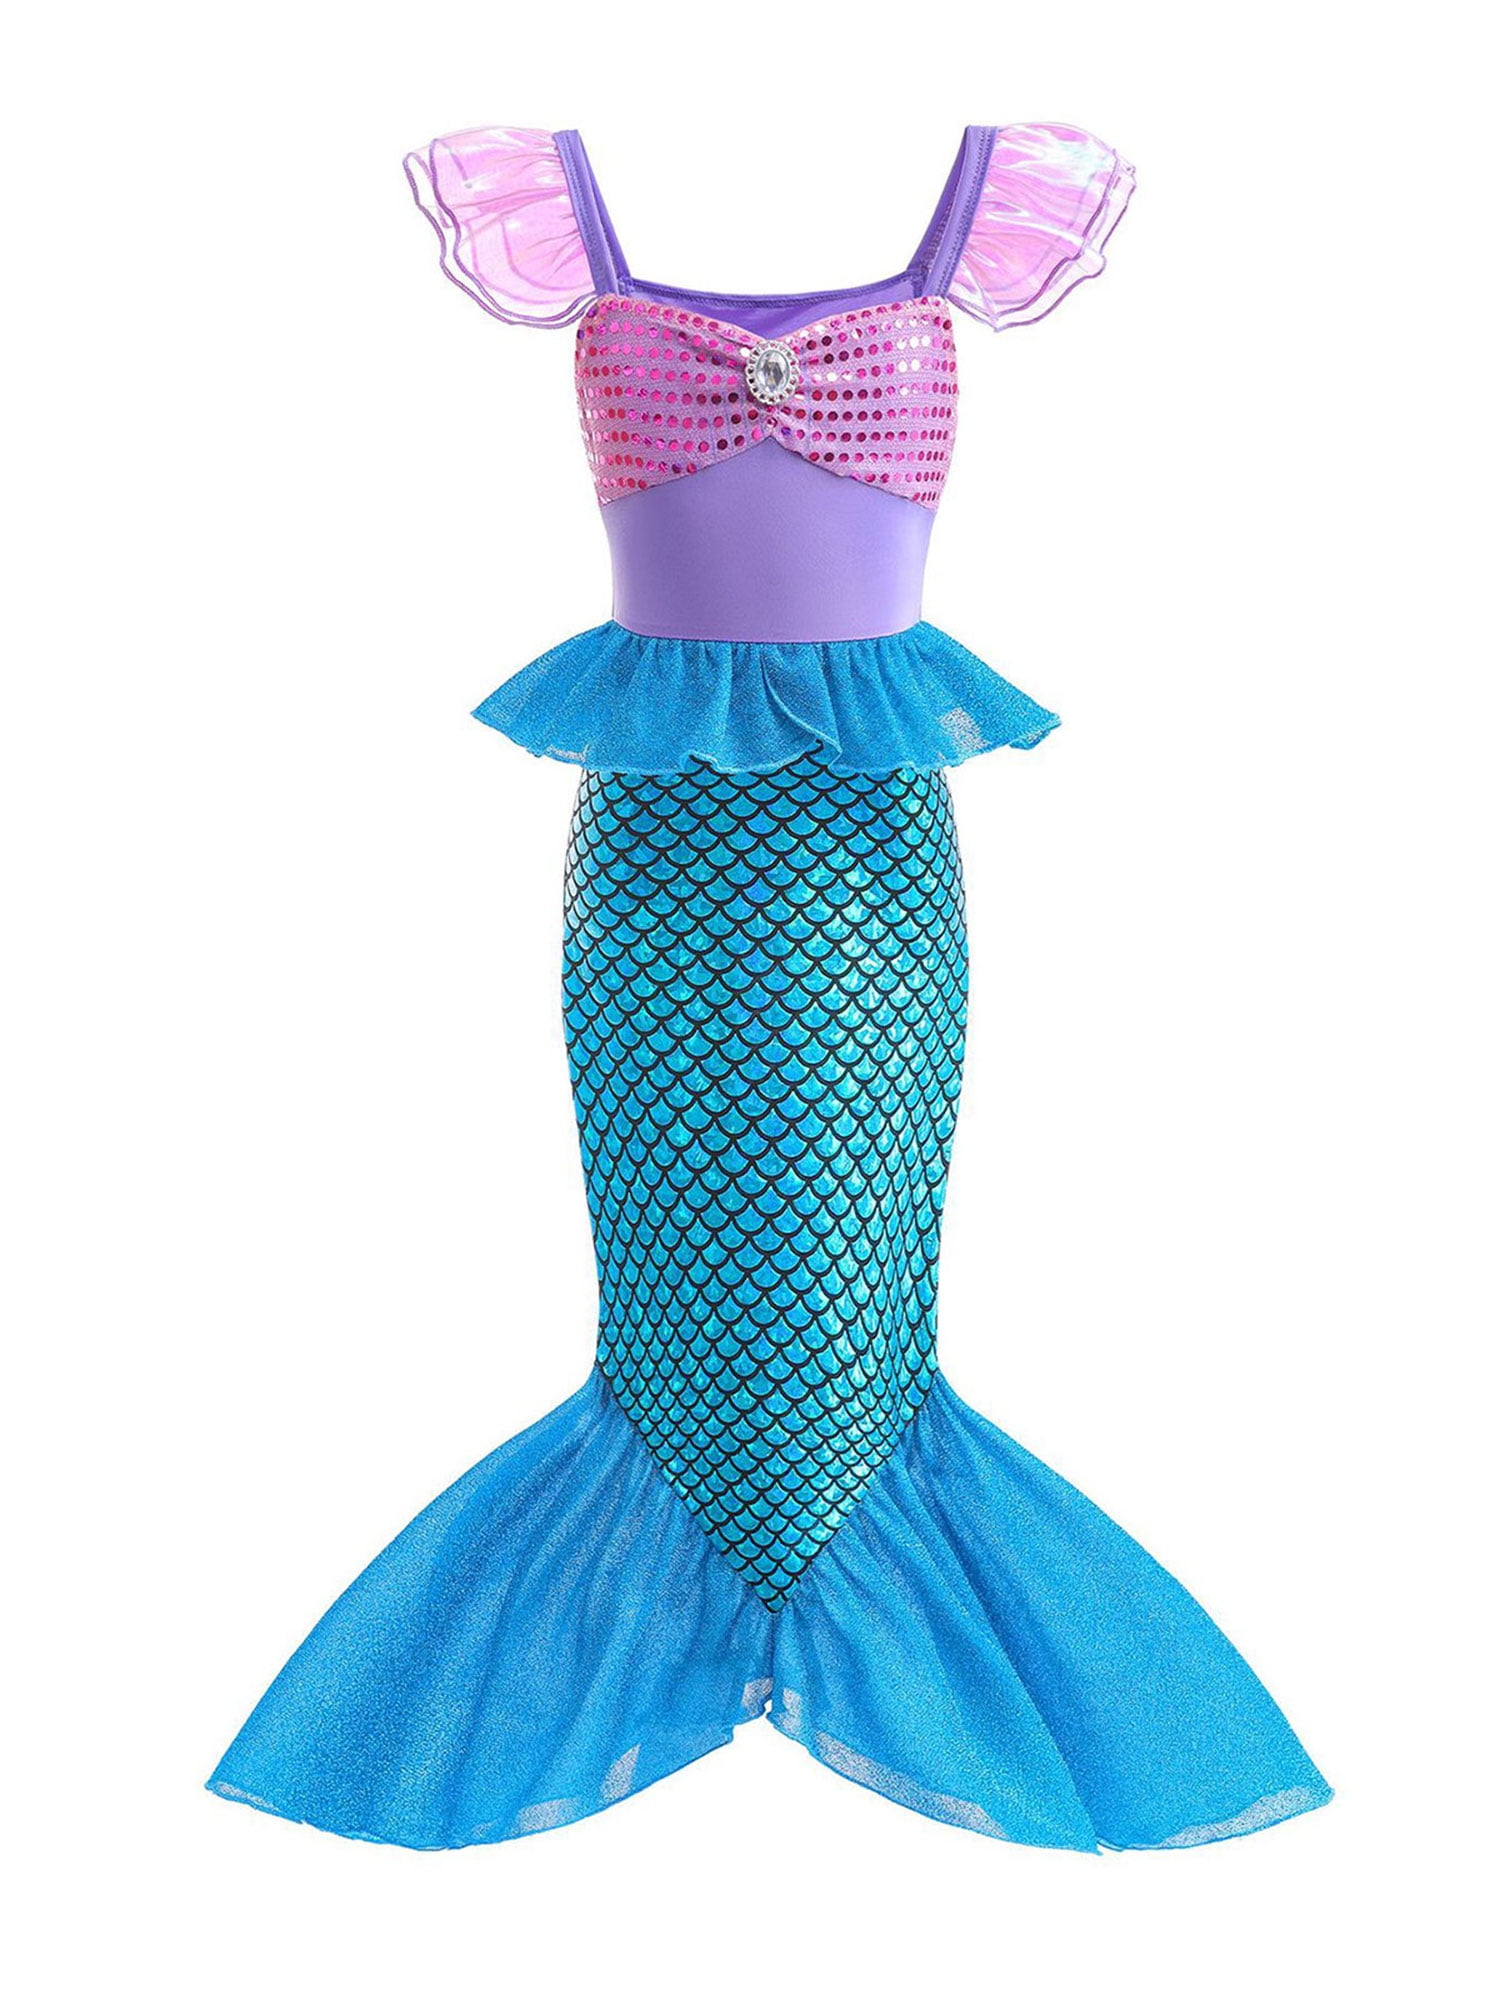 Asashitenel Kids Girls Halloween Mermaid Costume Fish Scale Print Fishtail  Dress for Toddler Role-Playing Party Cosplay Outfit 